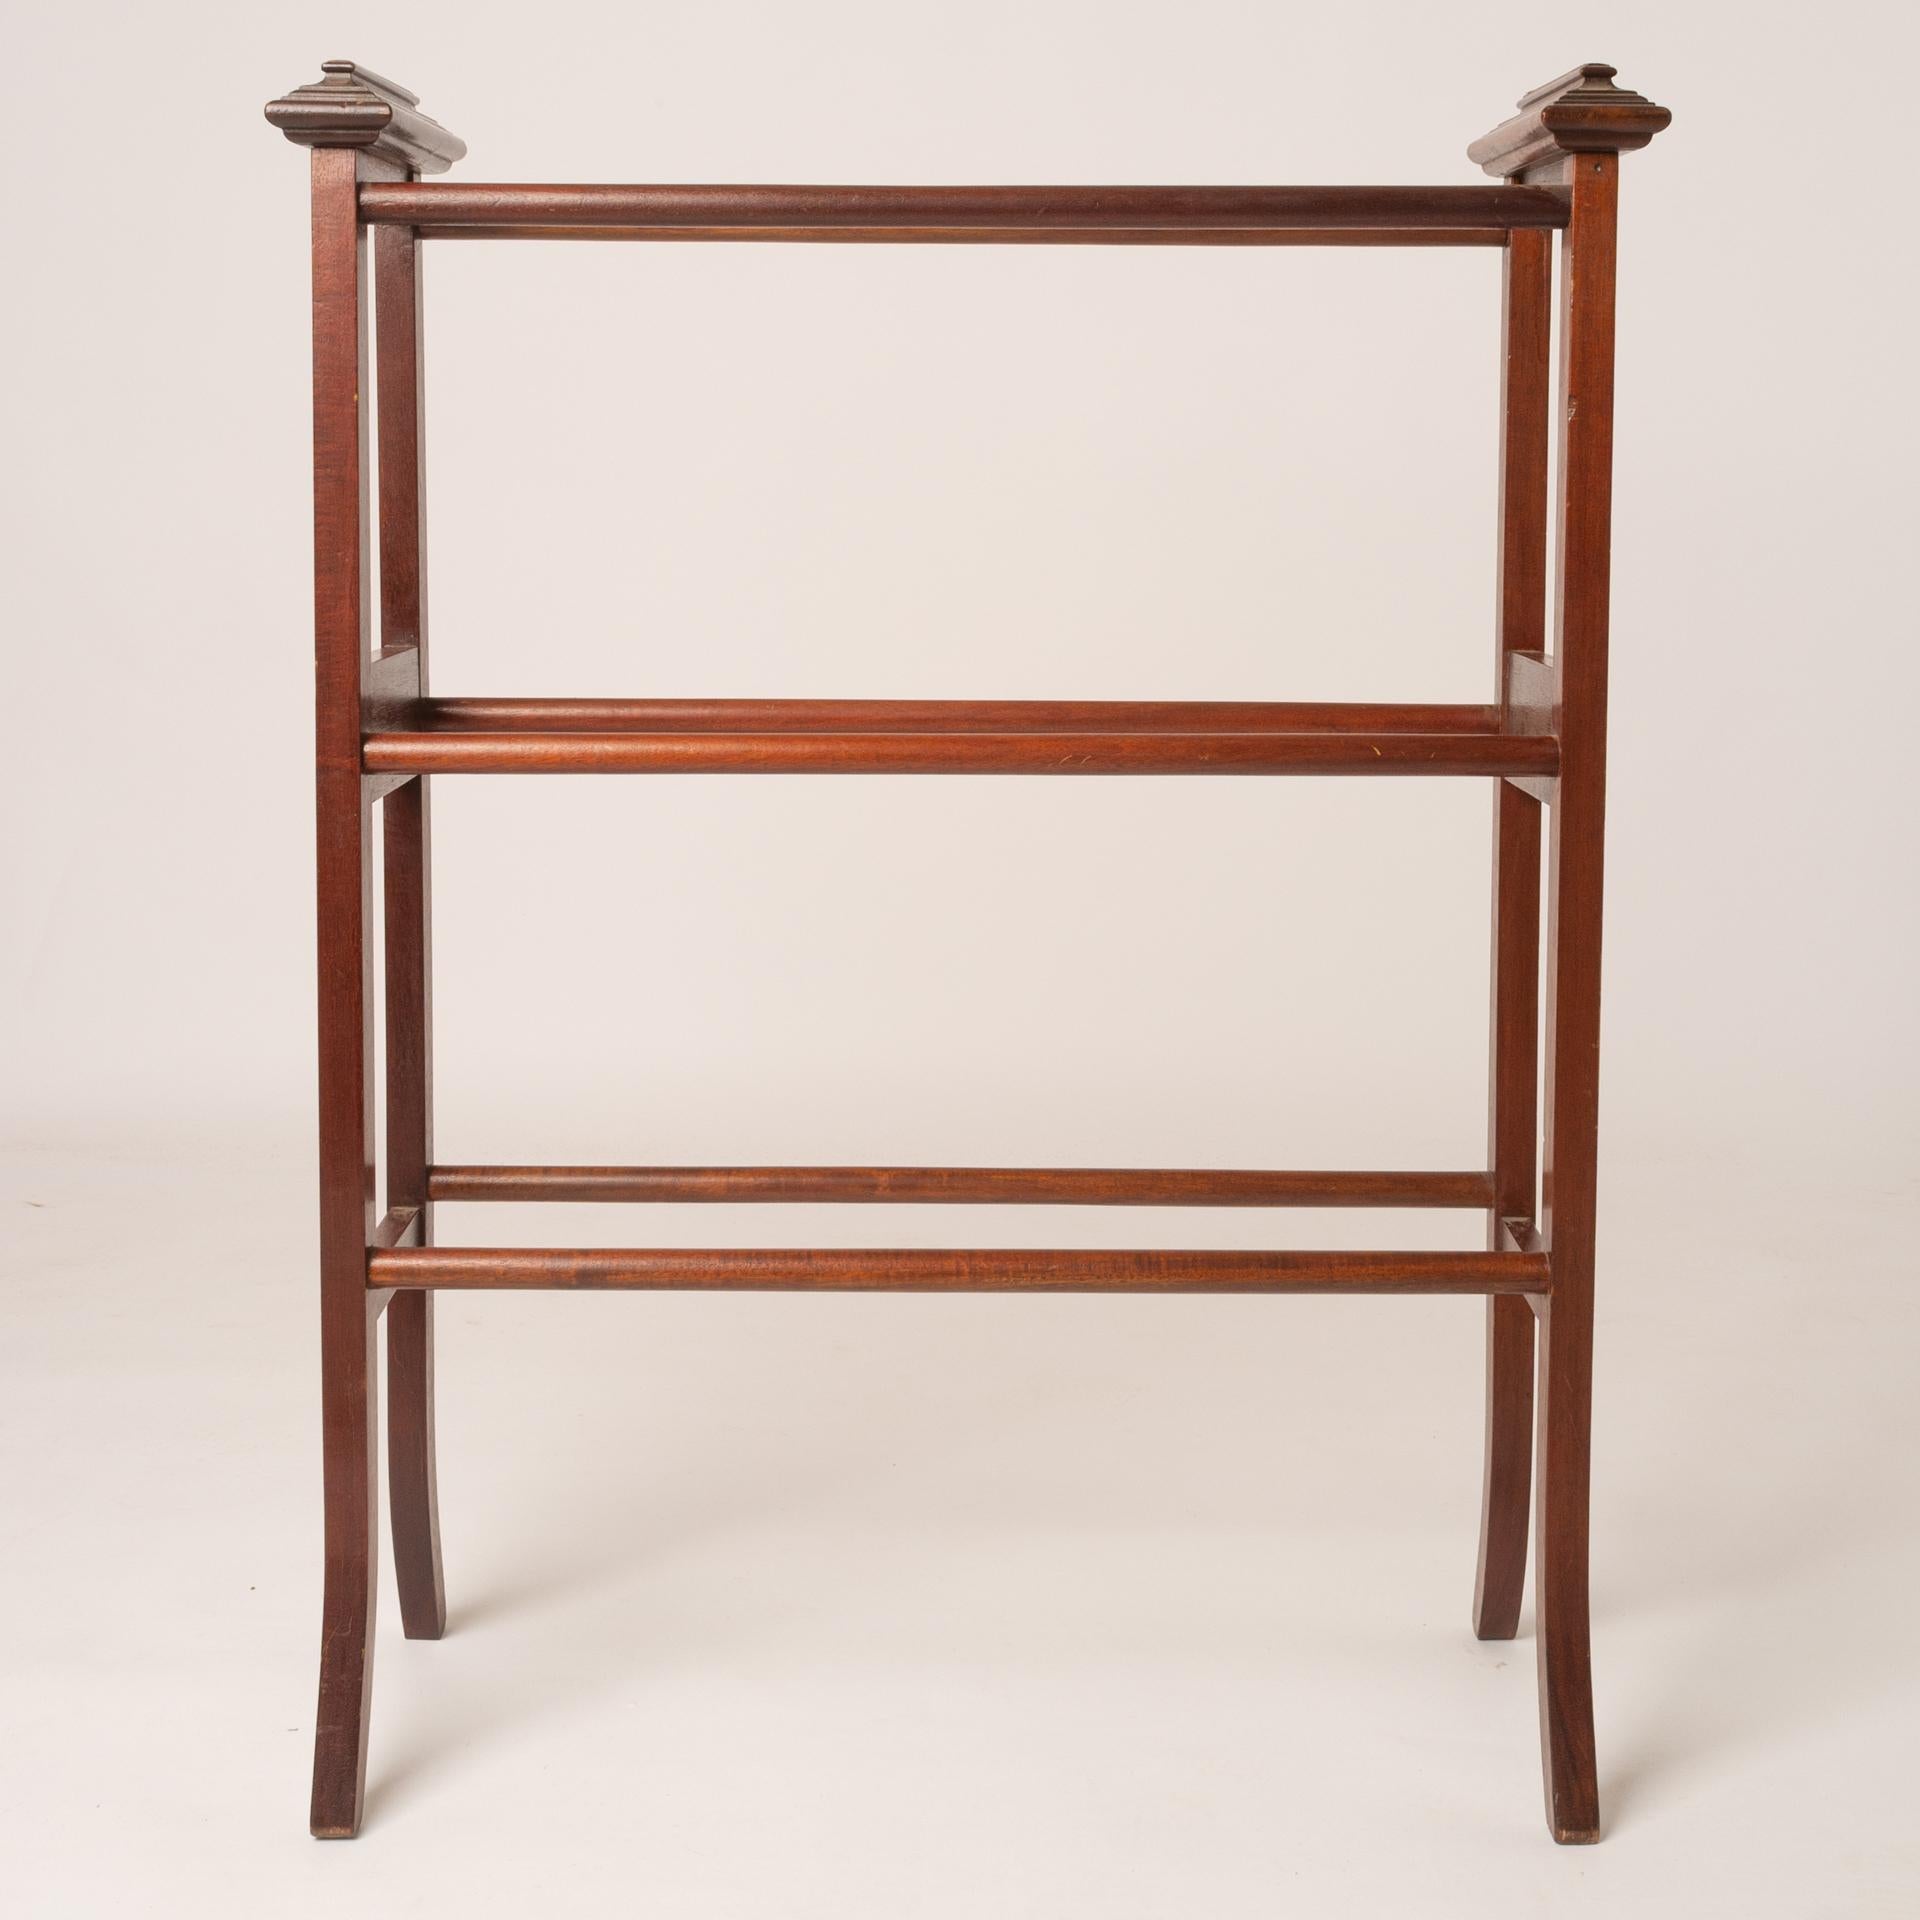 Early Victorian English Towel Holder Rack For Sale